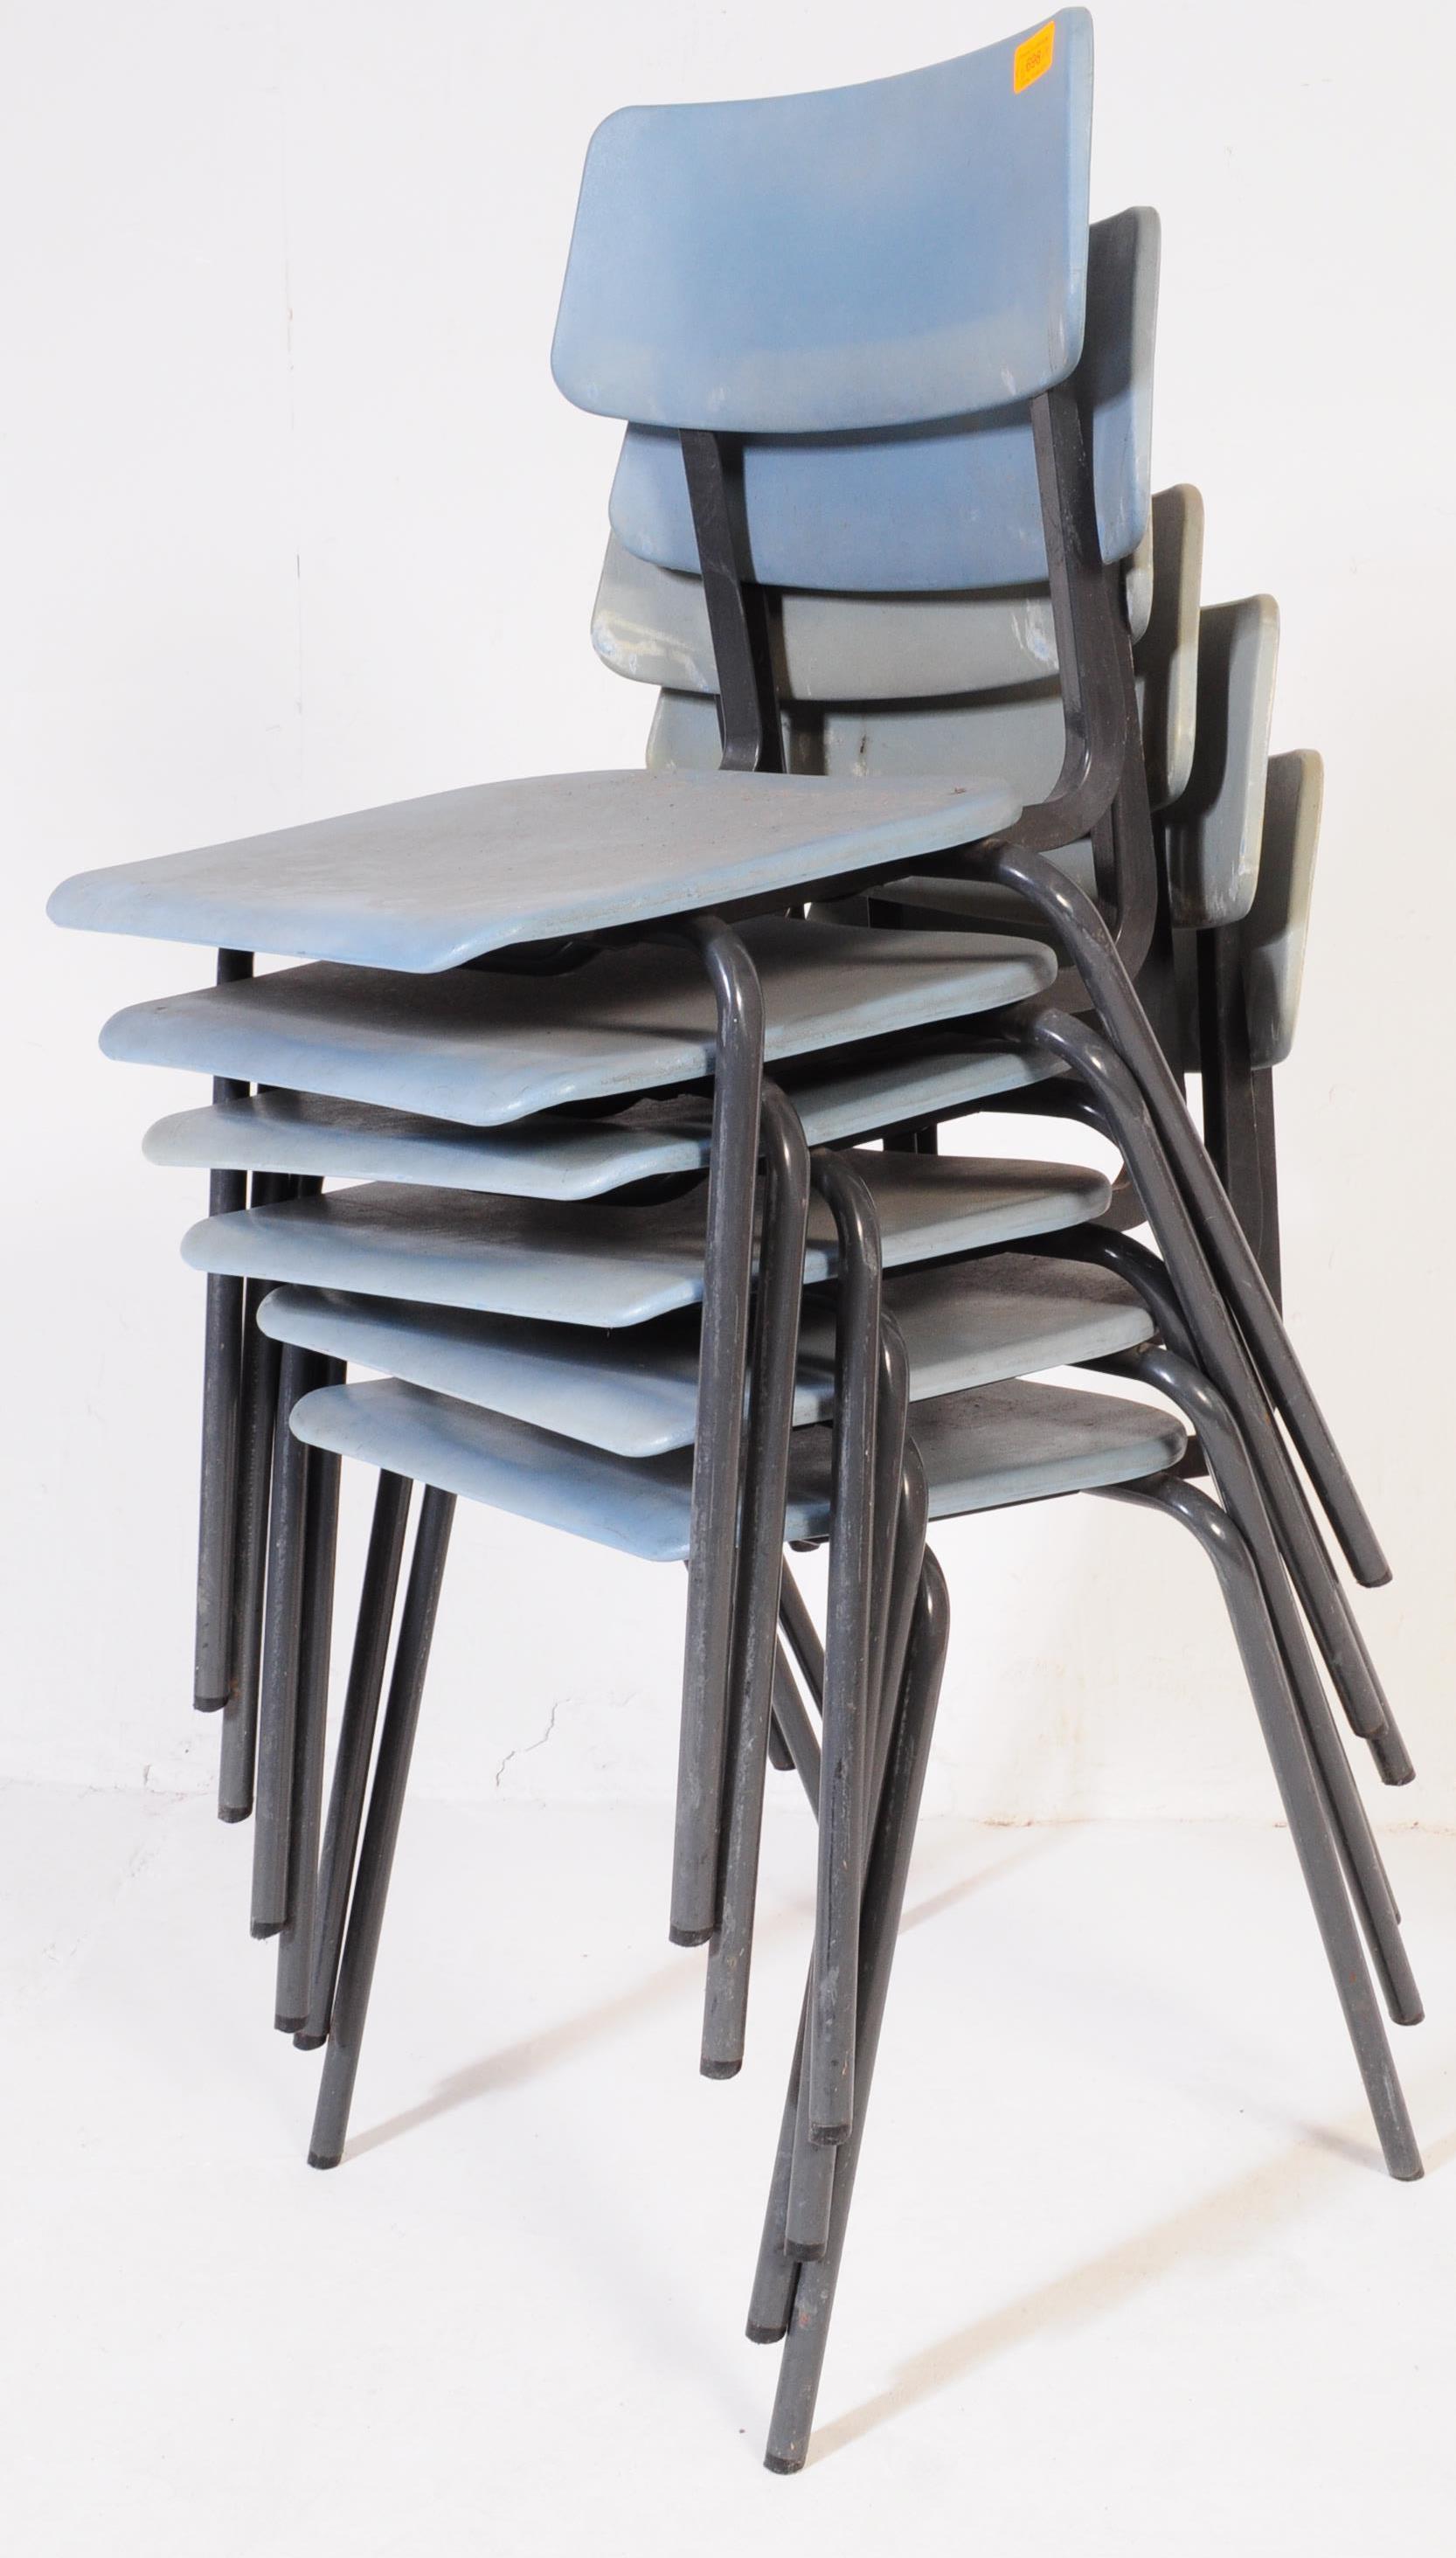 SET OF SIX RETRO VINTAGE 20TH CENTURY STACKING CHAIRS - Image 5 of 5